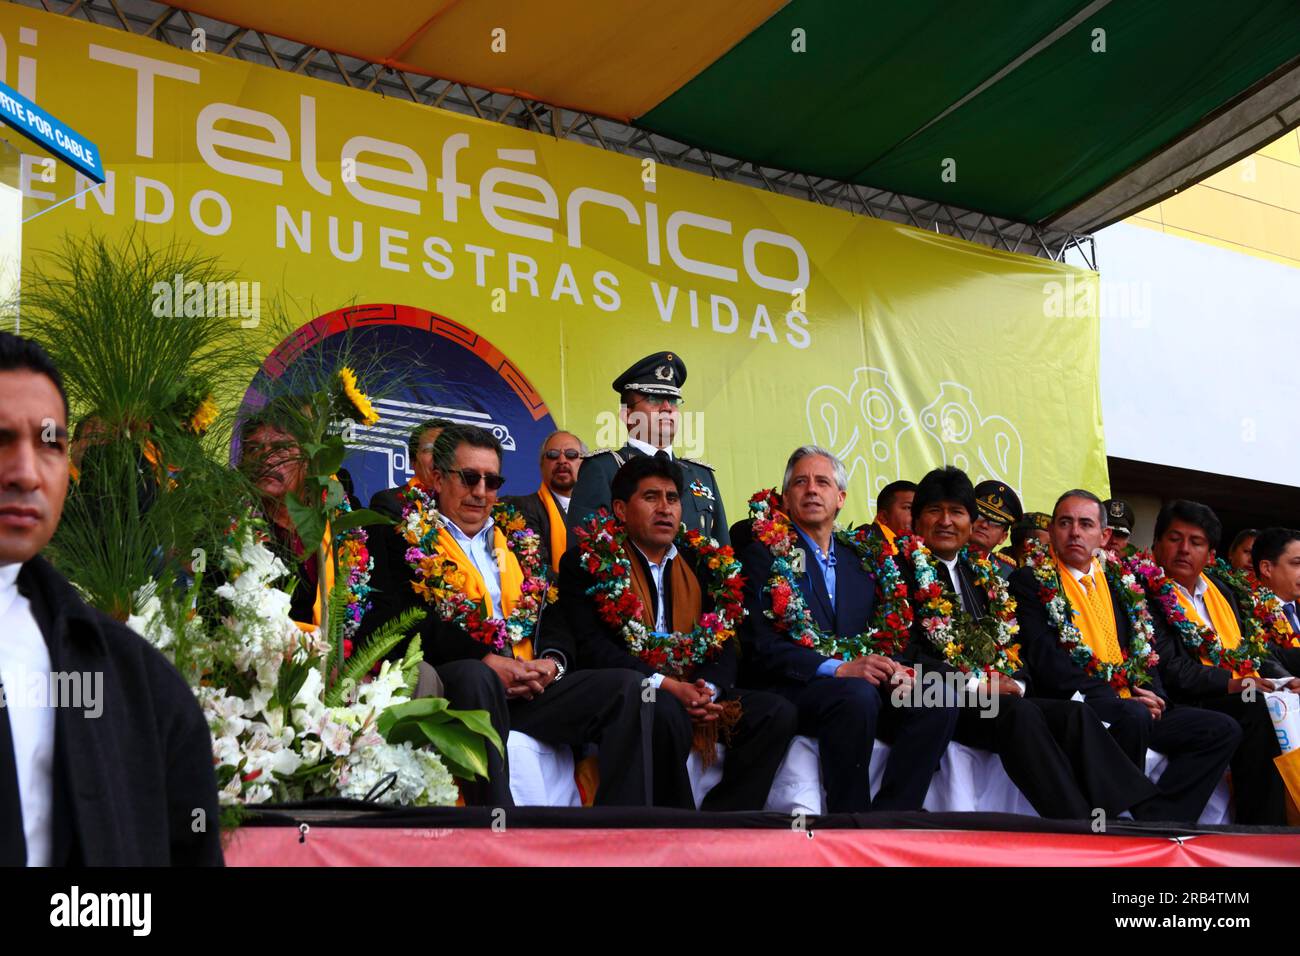 El Alto, Bolivia, 15th September 2014. Bolivian president Evo Morales (right of centre) and vice president Alvaro Garcia Linera (to the left) at the station in Ciudad Satelite during the inauguration ceremony of the Yellow Line. The Yellow Line is the second of three cable car lines to be opened this year, and is part of an ambitious project to relieve traffic congestion. The first line opened in May, when all three are open they will be the world's longest urban cable car system. The system has been built by the Austrian company Doppelmayr Stock Photo